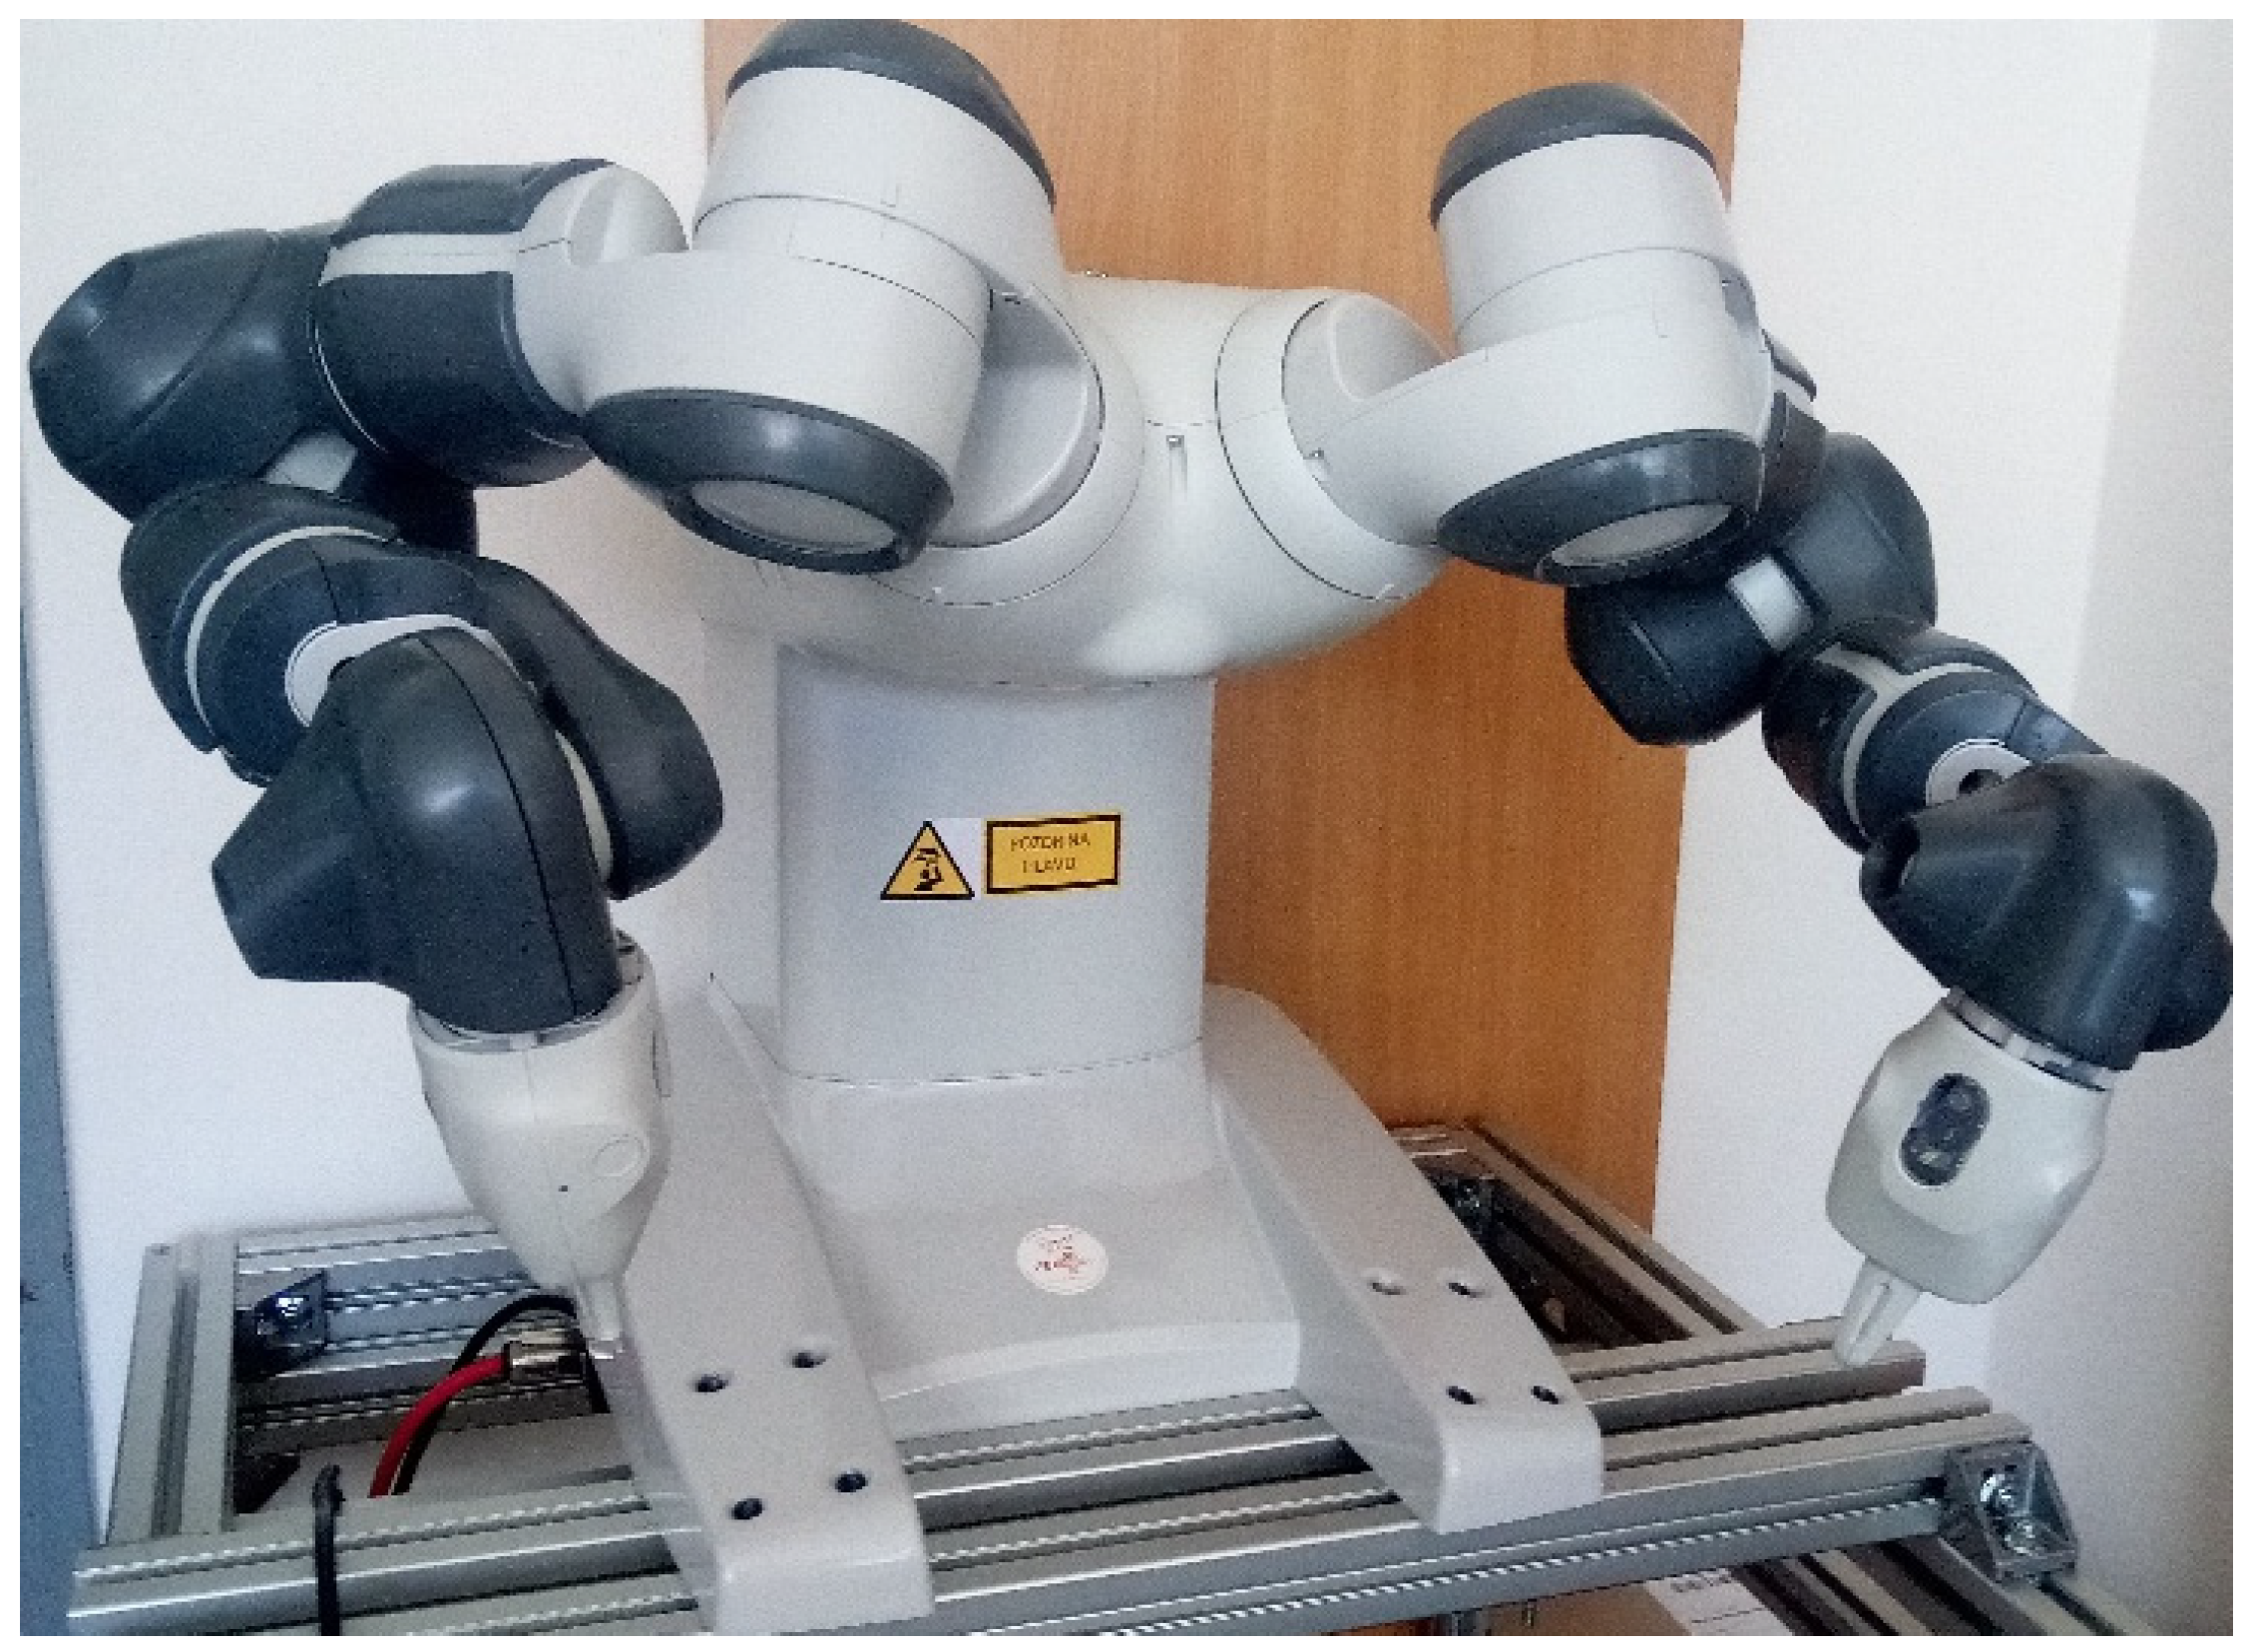 Electronics | Free Full-Text | Human-Robot Motion Control Application with  Artificial Intelligence for a Cooperating YuMi Robot